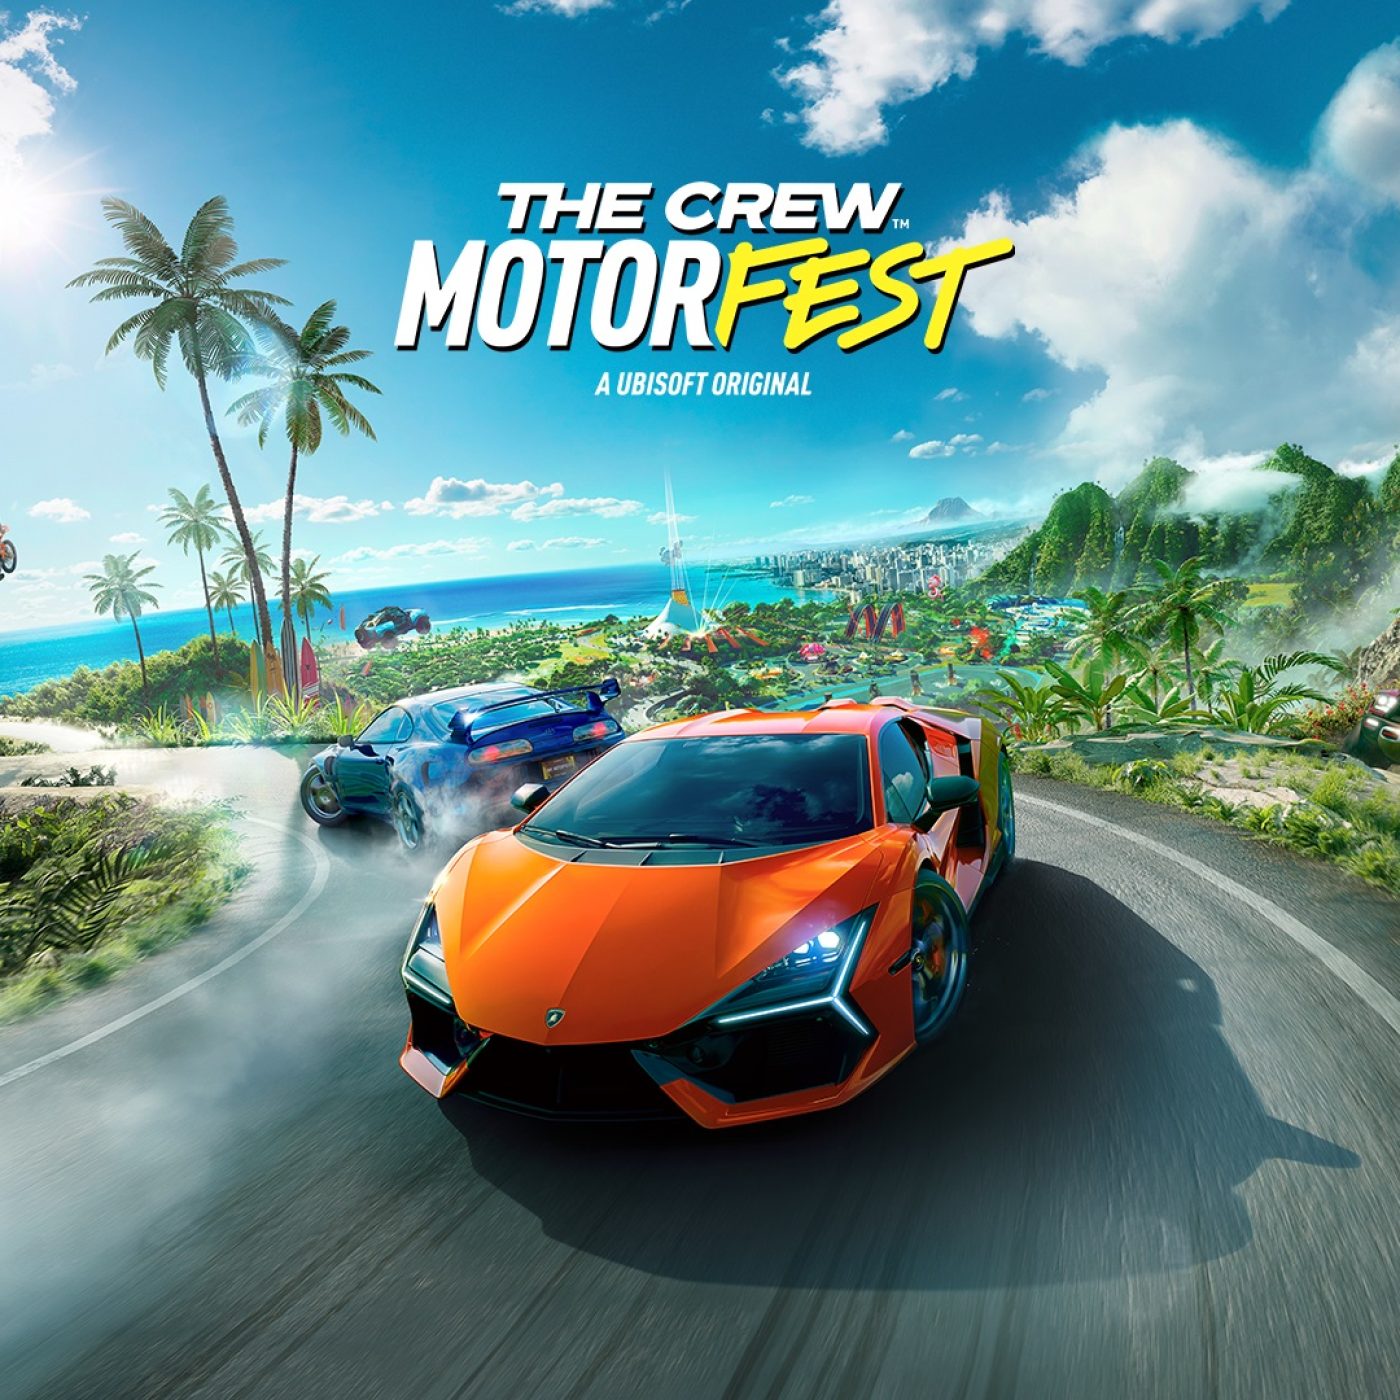 You can transfer your beloved The Crew 2 cars into The Crew Motorfest